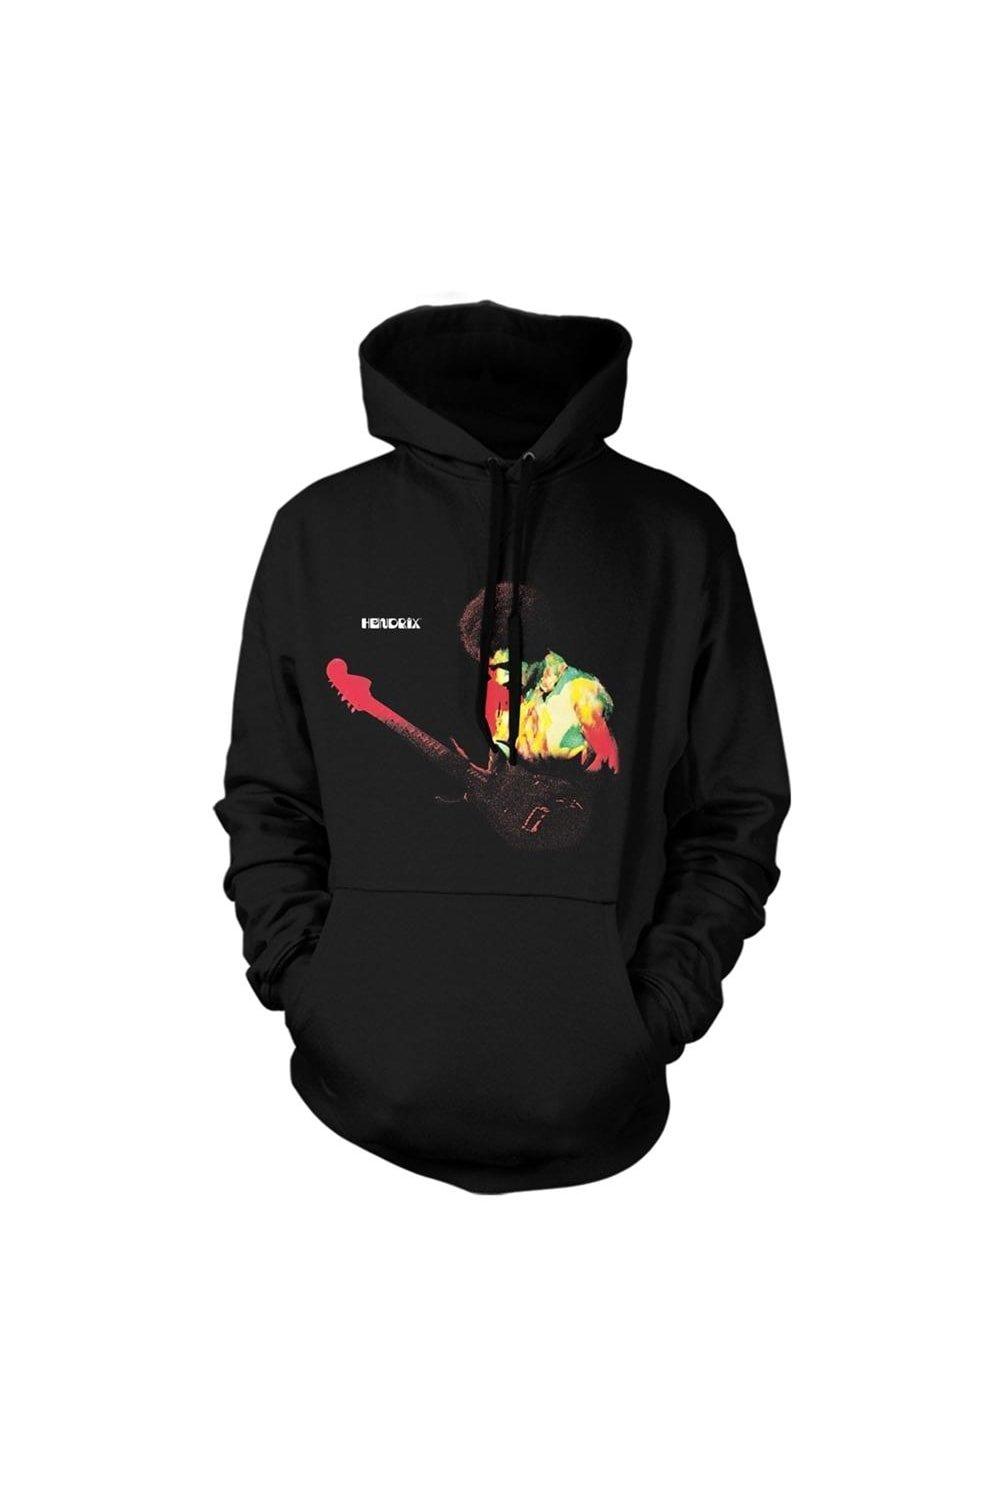 Band Of Gypsys Hoodie